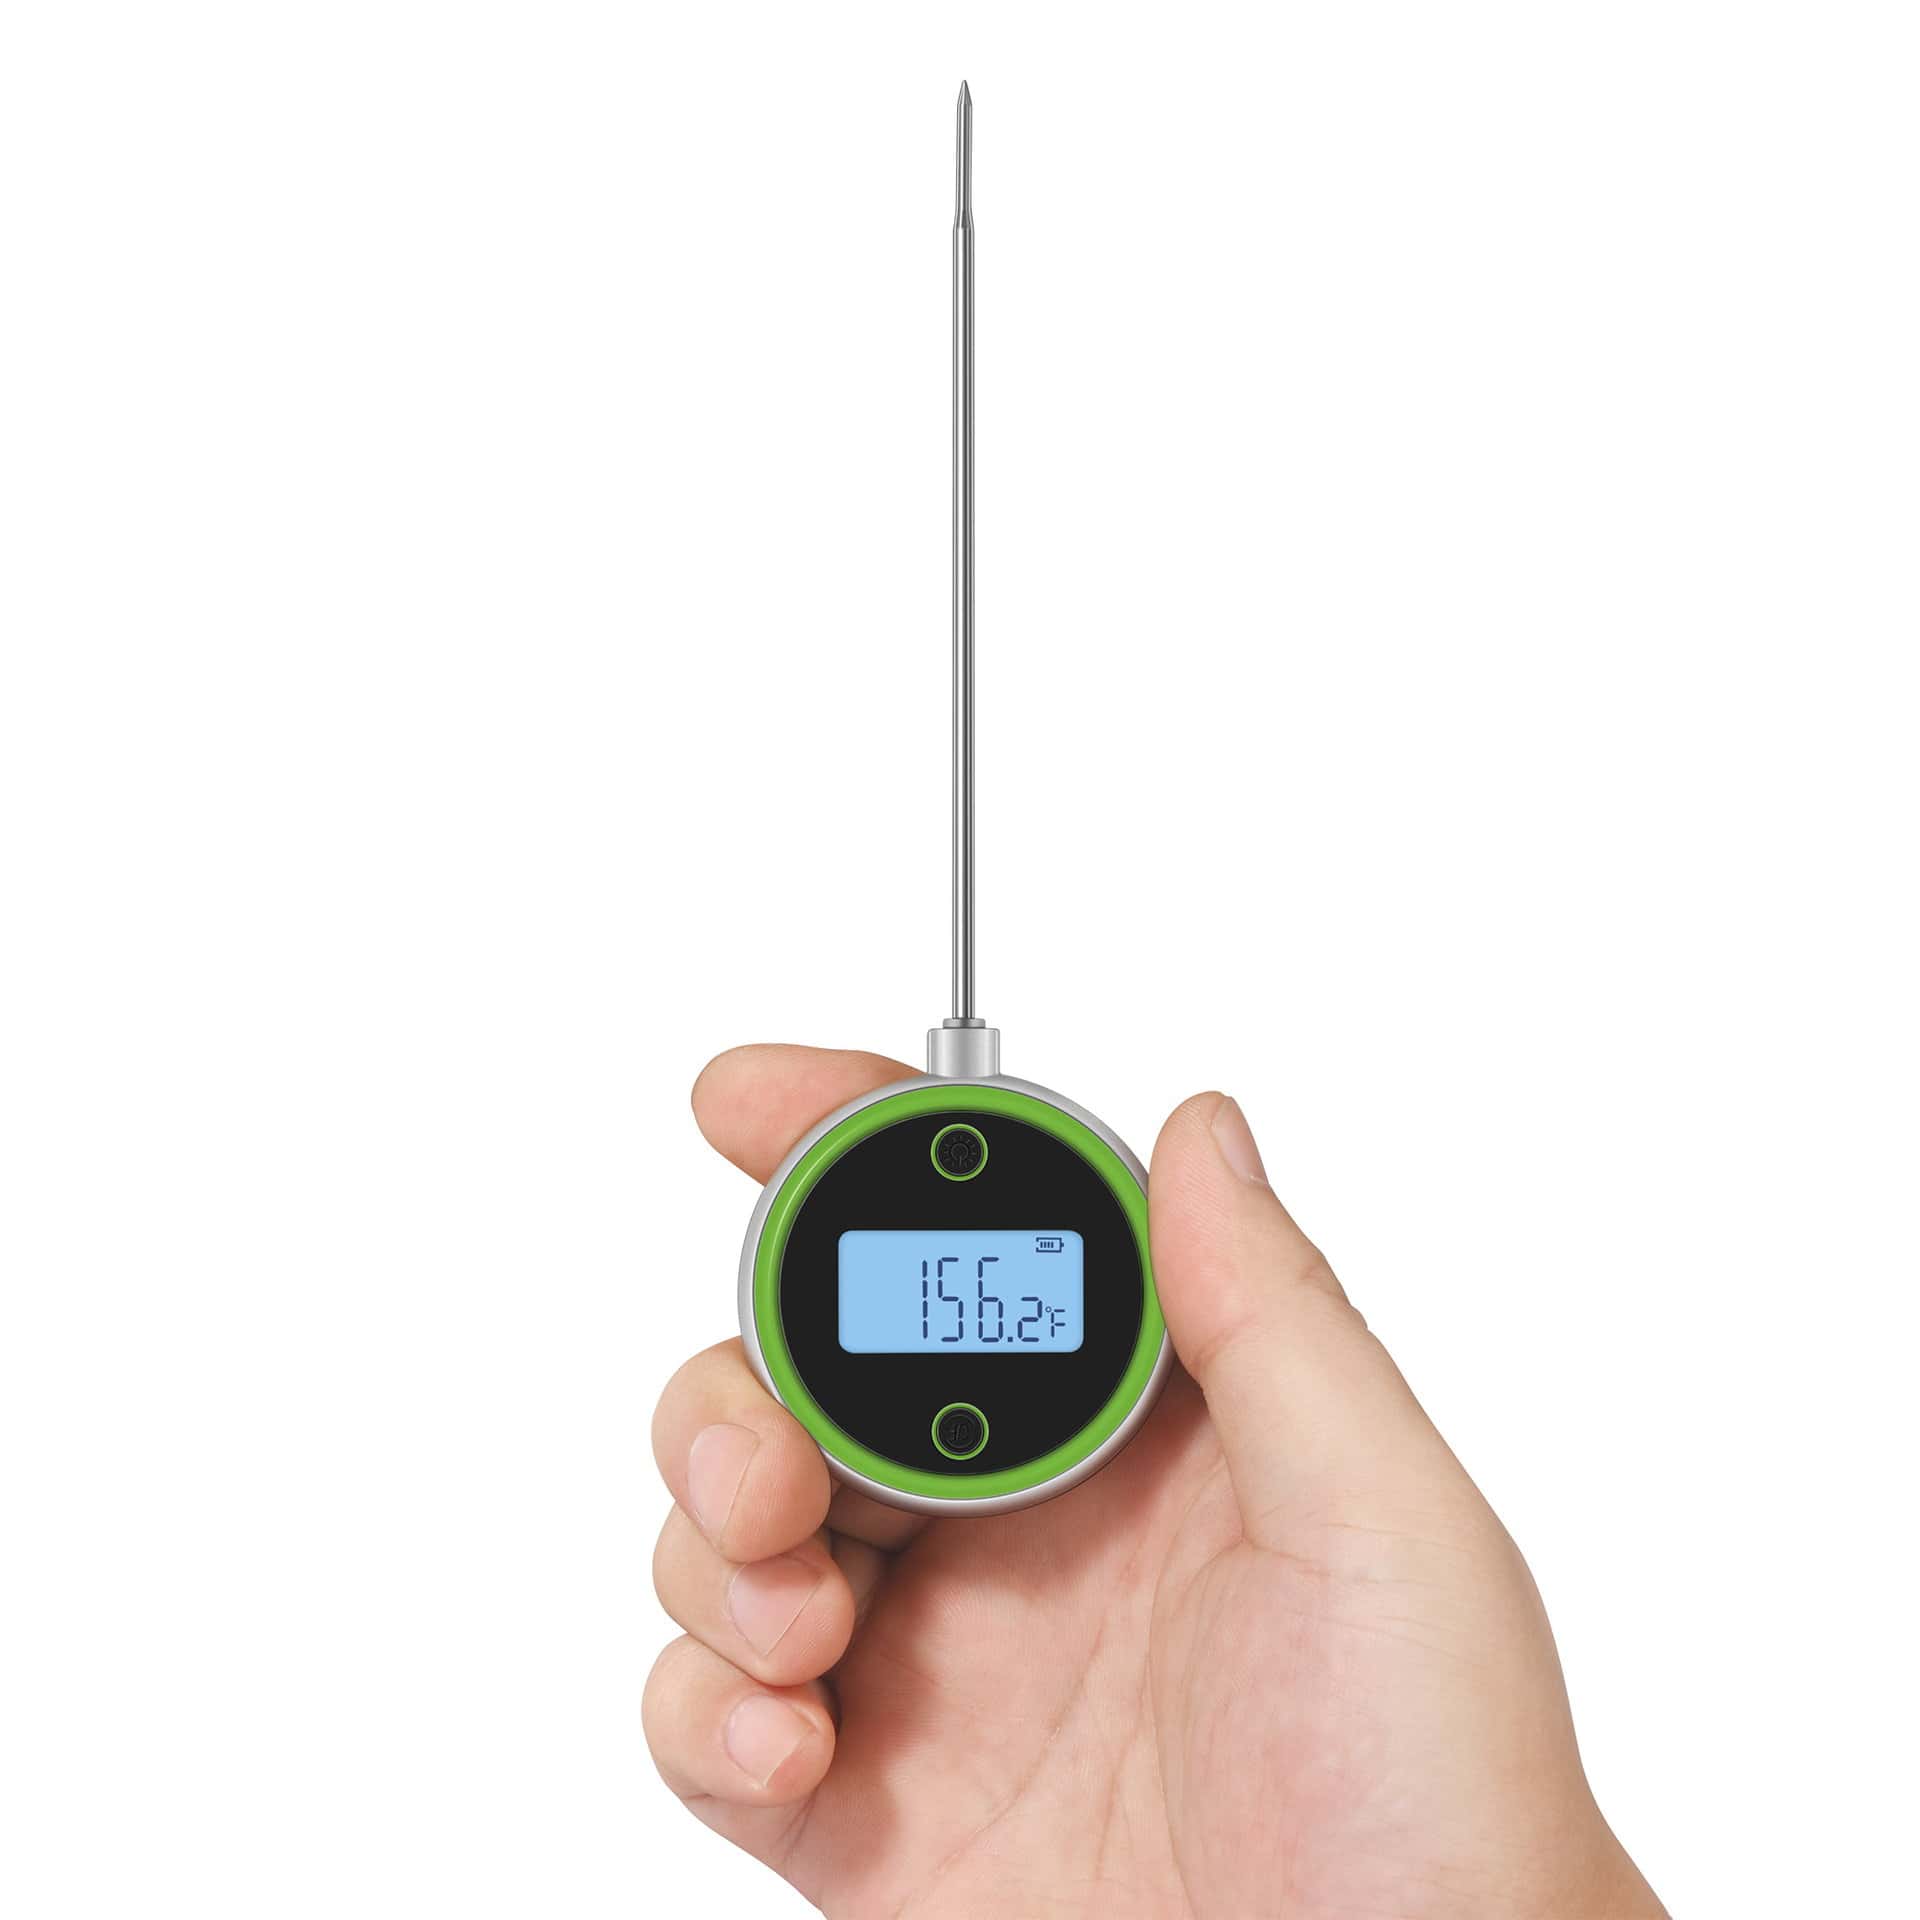 https://www.chefstemp.com/wp-content/uploads/2021/08/chefstemp-pocket-pro-cooking-thermometer-07.jpg